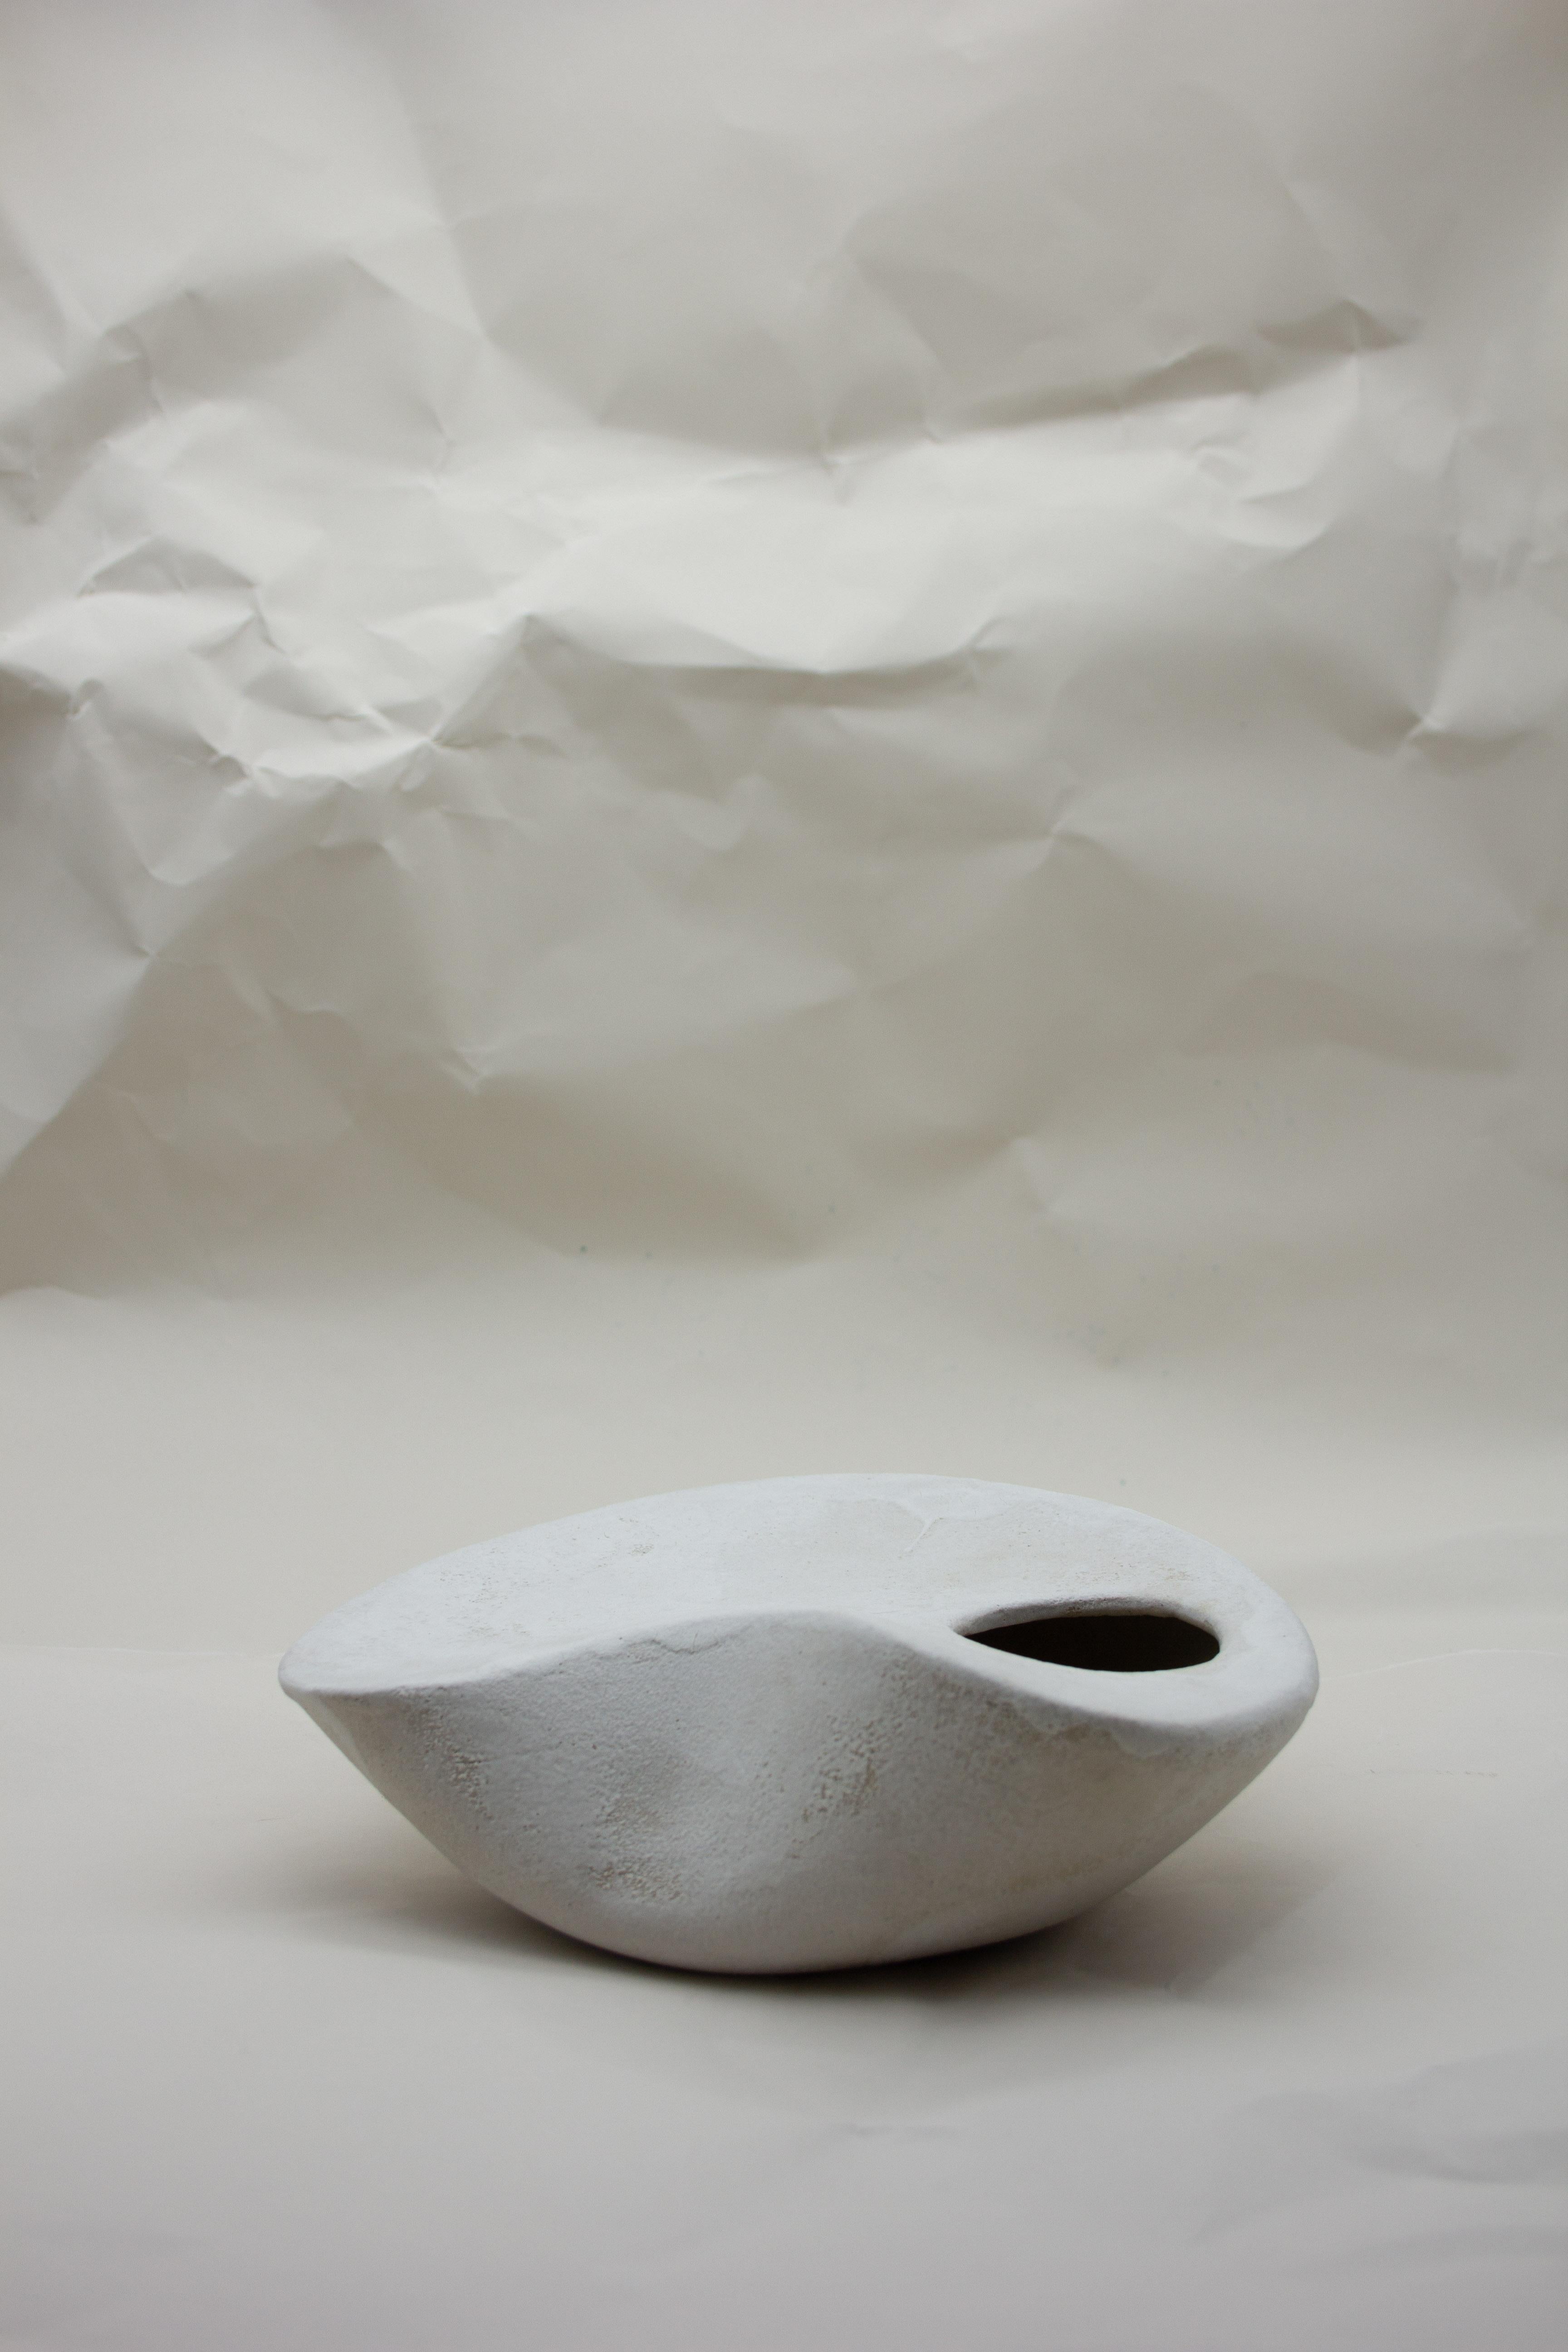 The Curved Form blurs the boundary between a functional vase and a sculptural object. Created as part of the Soft, Soft Hard 2018 Collection, this piece is an exploration into form and the relationship between the wheel and hand building, with a nod